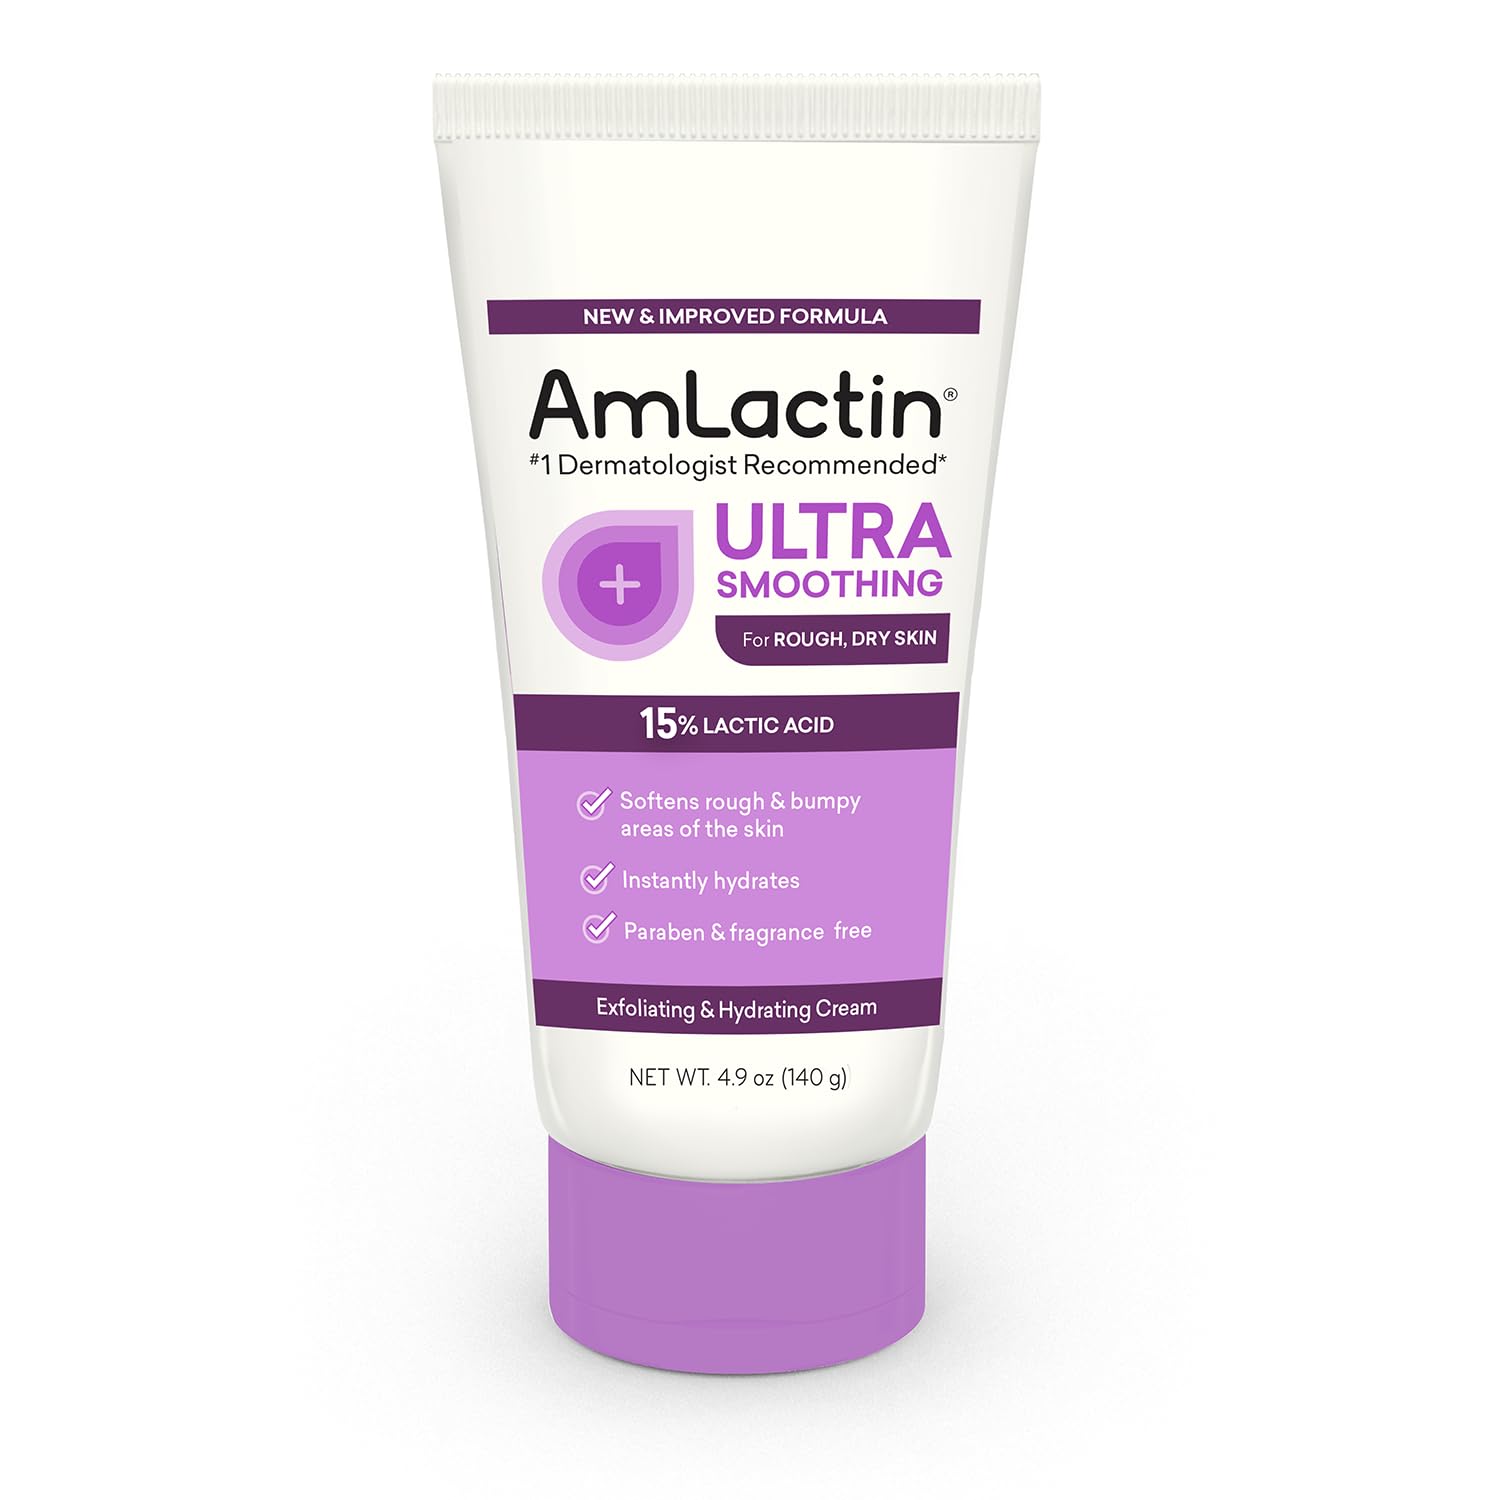 AmLactin Intensive Healing Body Lotion for Dry Skin – 7.9 oz Pump Bottle & Ultra Smoothing-4.9 oz Body & Hand Cream with 15% Lactic Acid-Exfoliator and Moisturizer for Rough and Bumpy Dry Skin